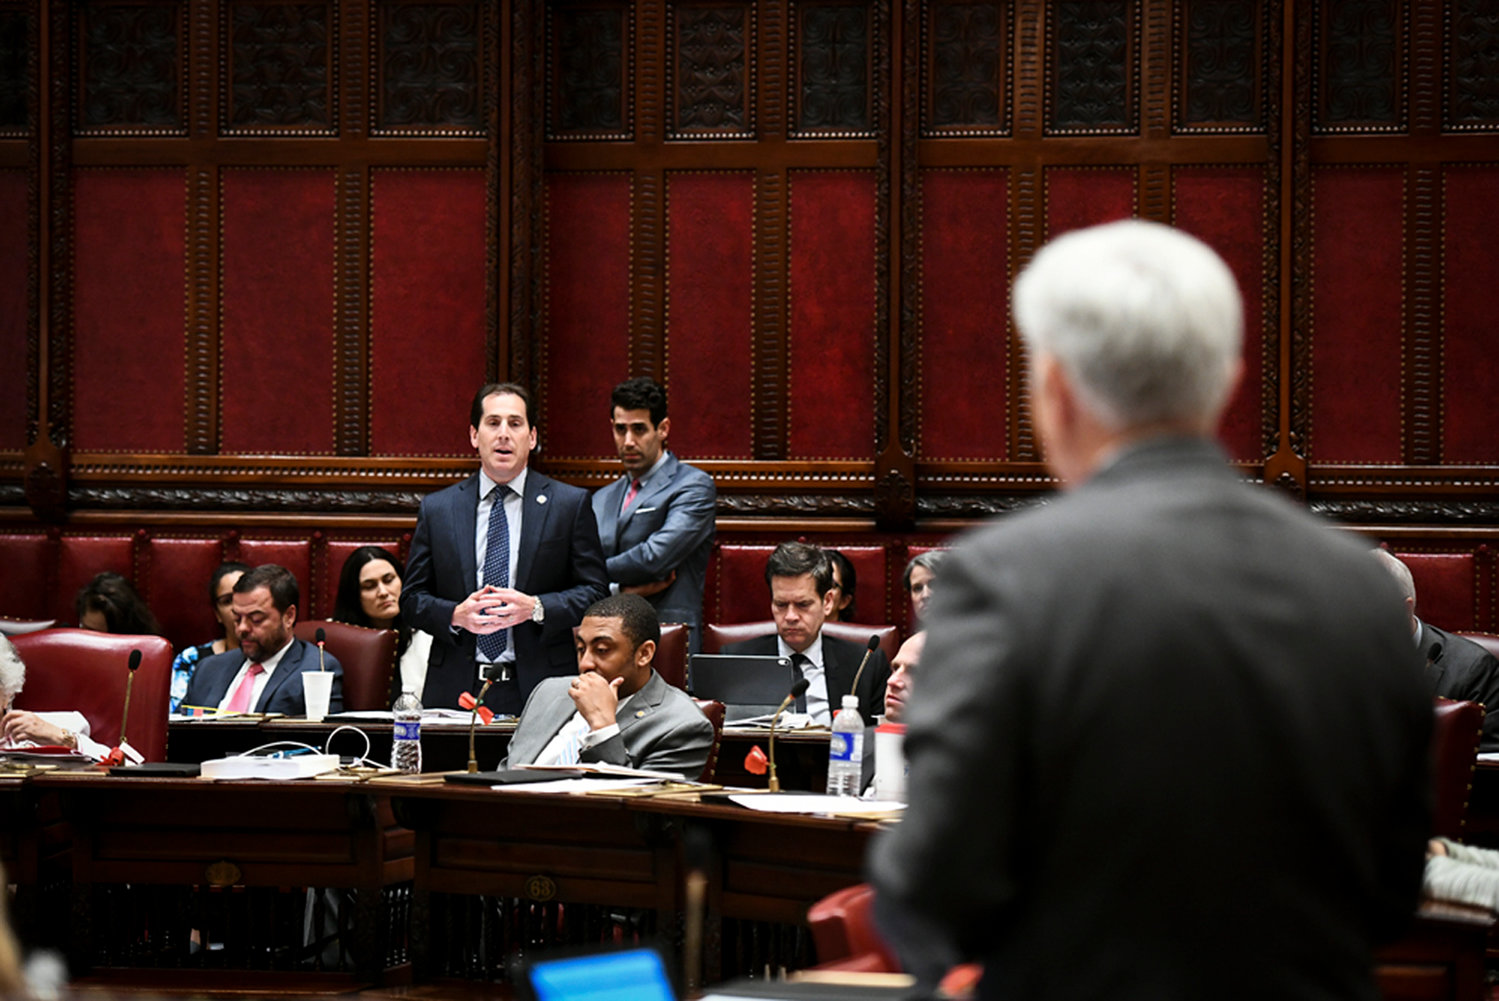 State Sen. Todd Kaminsky arguing on the Senate floor for the Climate Leadership and Community Protection Act. With passage in both houses of the Legislature, and a vow from Gov. Andrew Cuomo to sign the act into law, it would become the most aggressive plan to address climate change in the country.